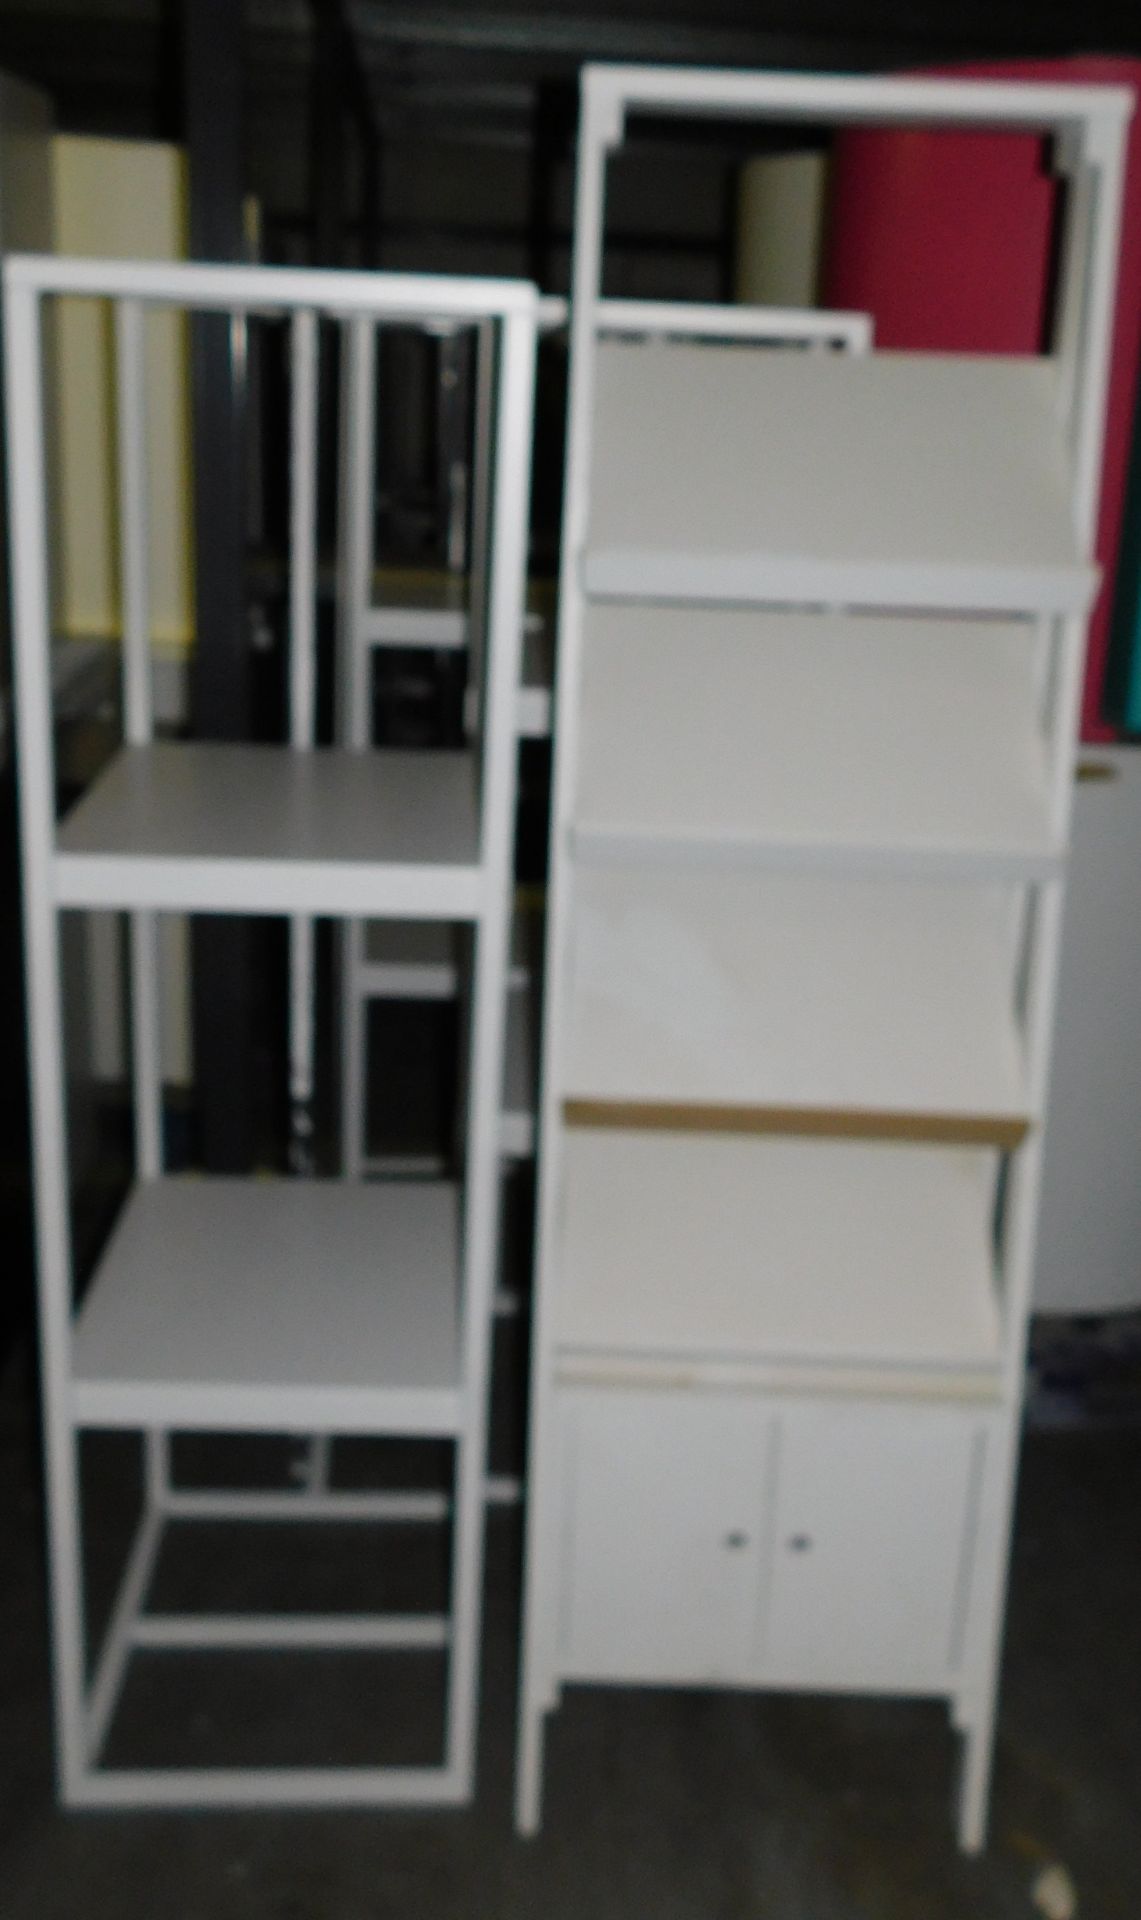 9 Shelving Units & Magazine Stand (Located Huntingdon, See General Notes for More Details) - Image 2 of 2